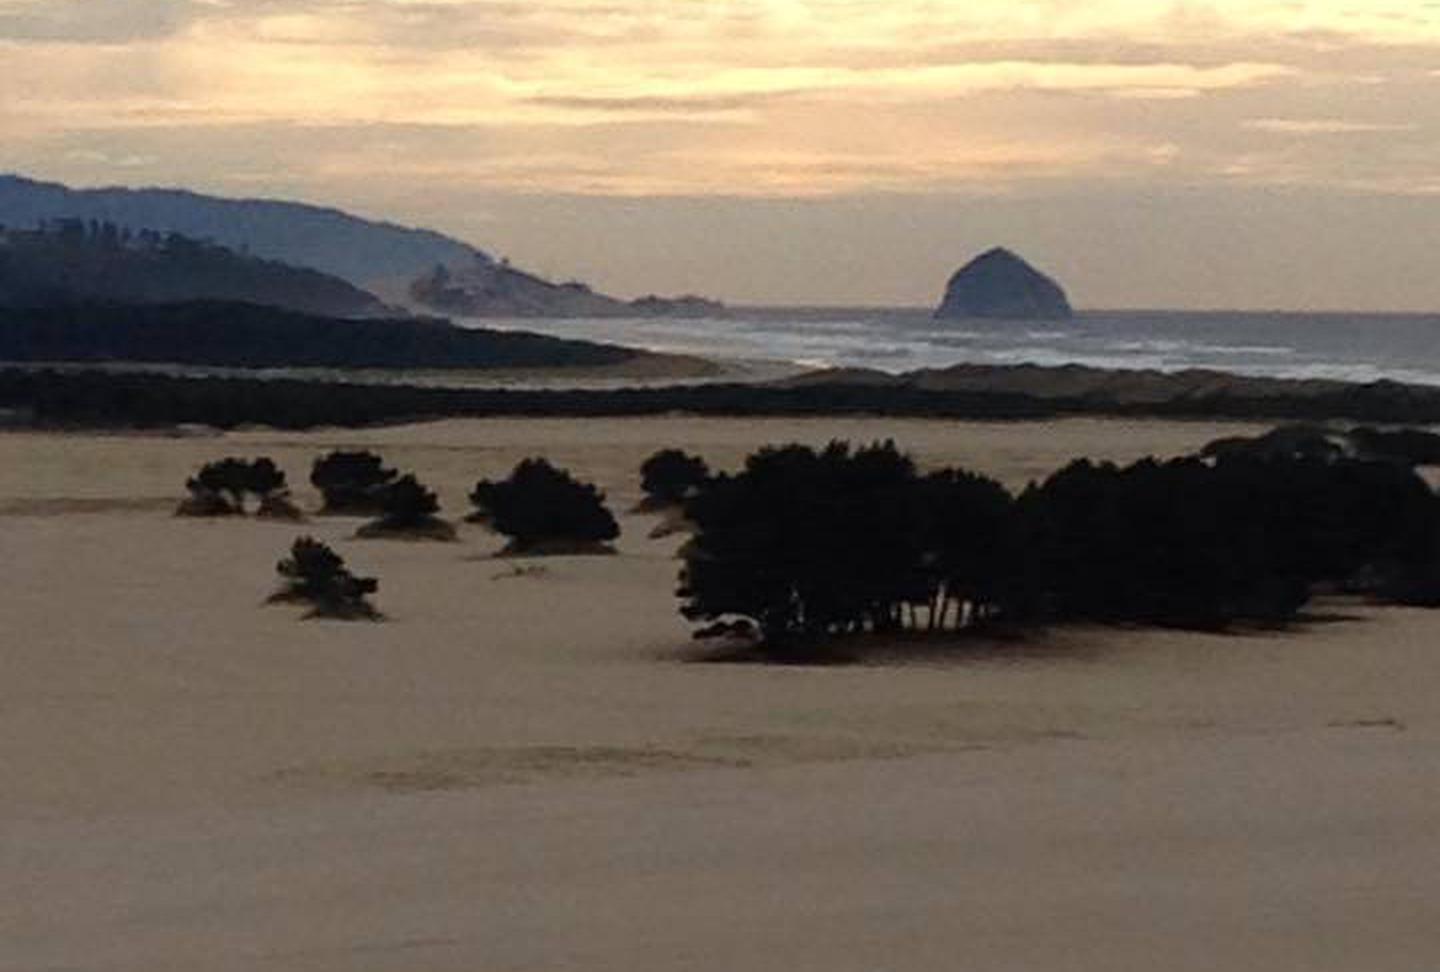 Sand DunesWind swept trees on flat beach with fog bank over coastal hills in background.